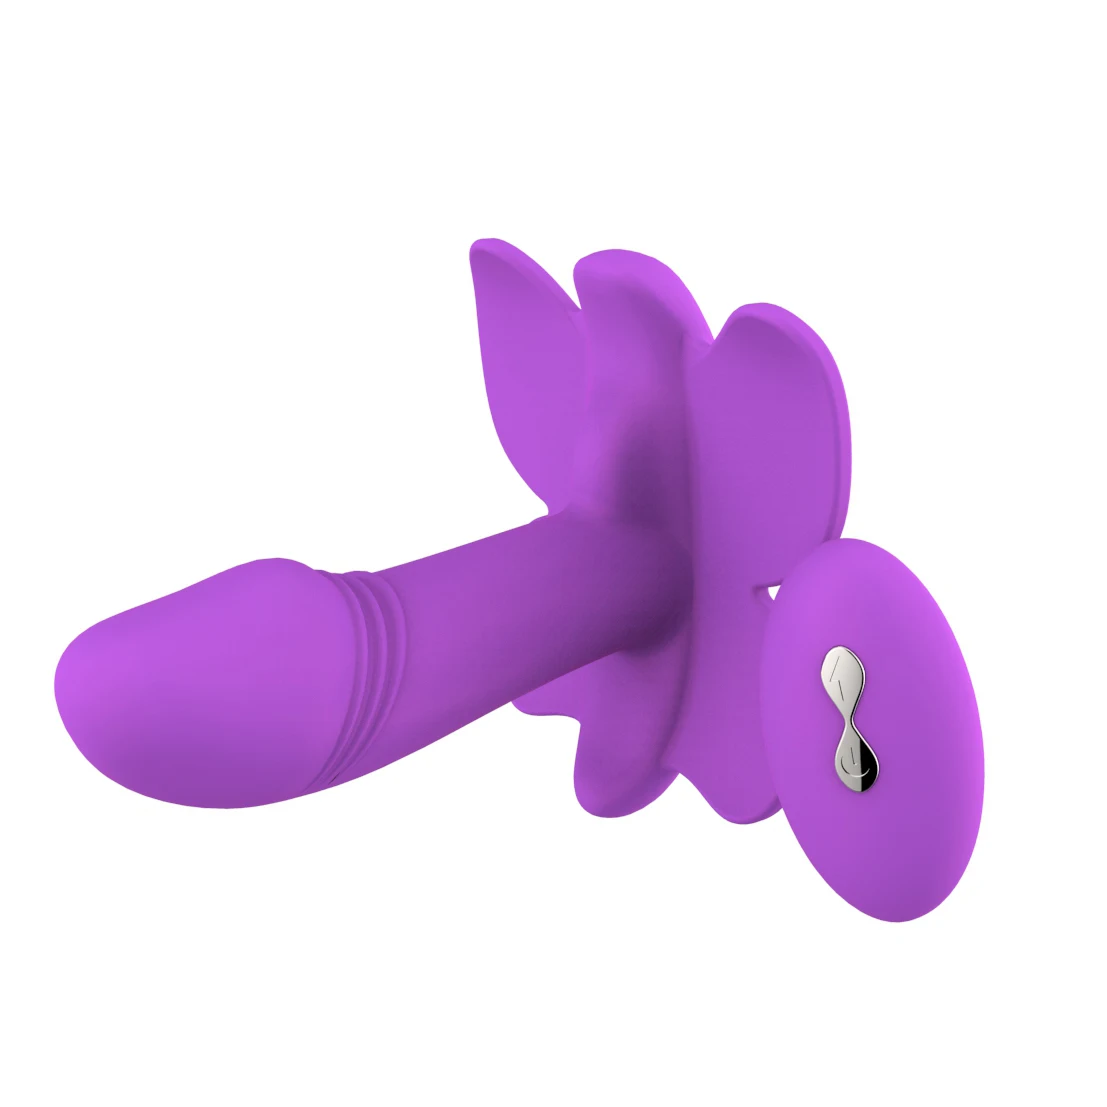 Butterfly Dildo Vibrator for Women Sexy Toy Women's panties Wireless Remote Control Egg Supplies Scca99a749b6b46b4a66085c63d8f17a3X